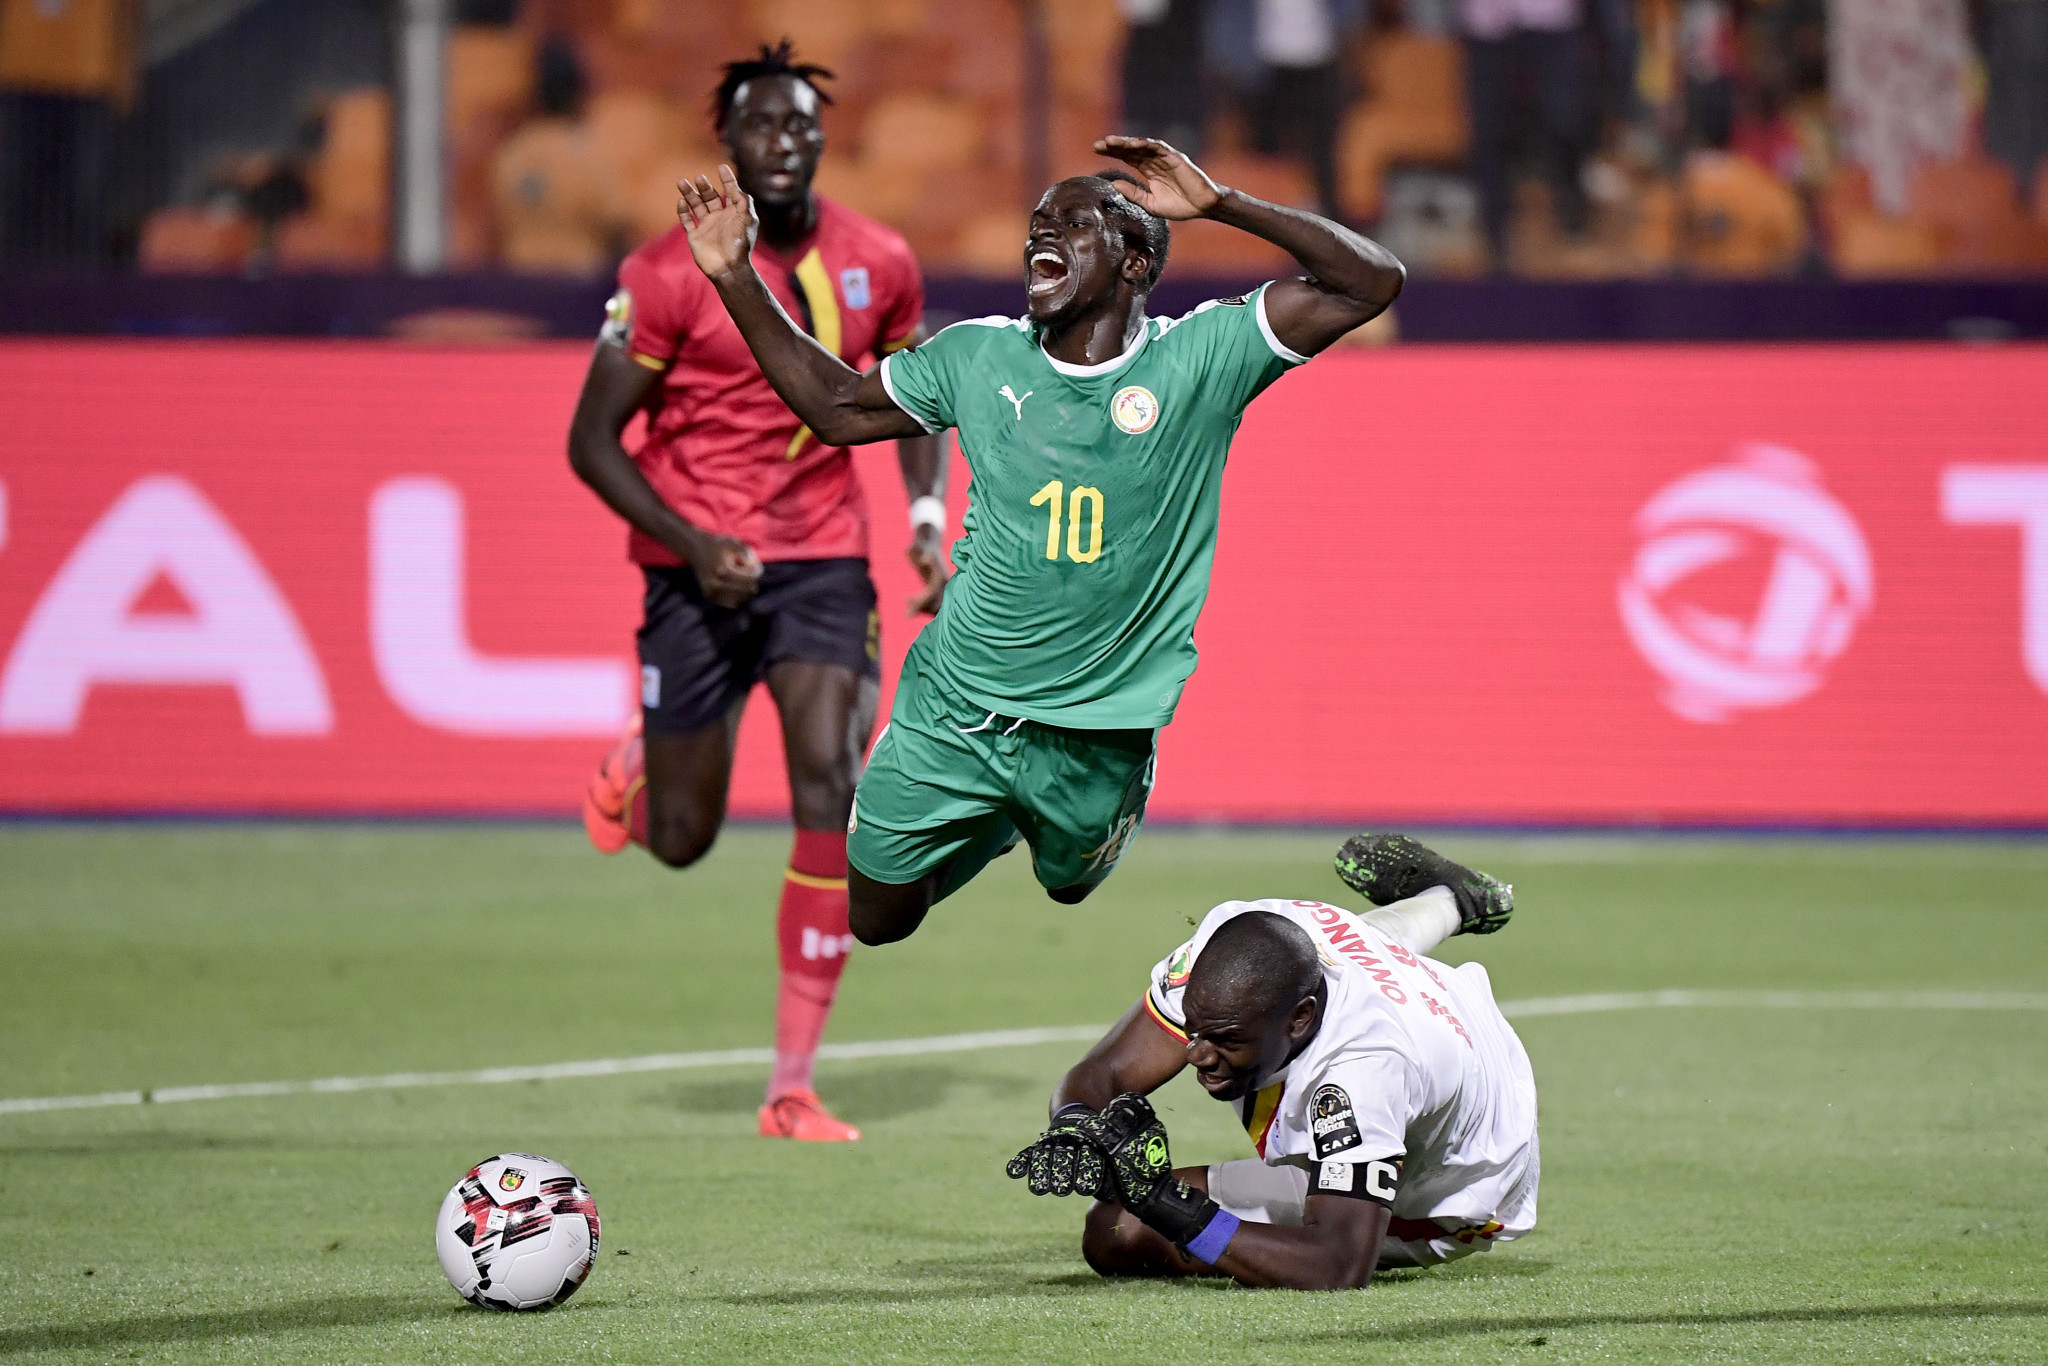 Sadio Mané earns a penalty he would go on to miss - but an earlier goal from him won Senegal a place in the Africa Cup of Nations quarter-finals ©Getty Images